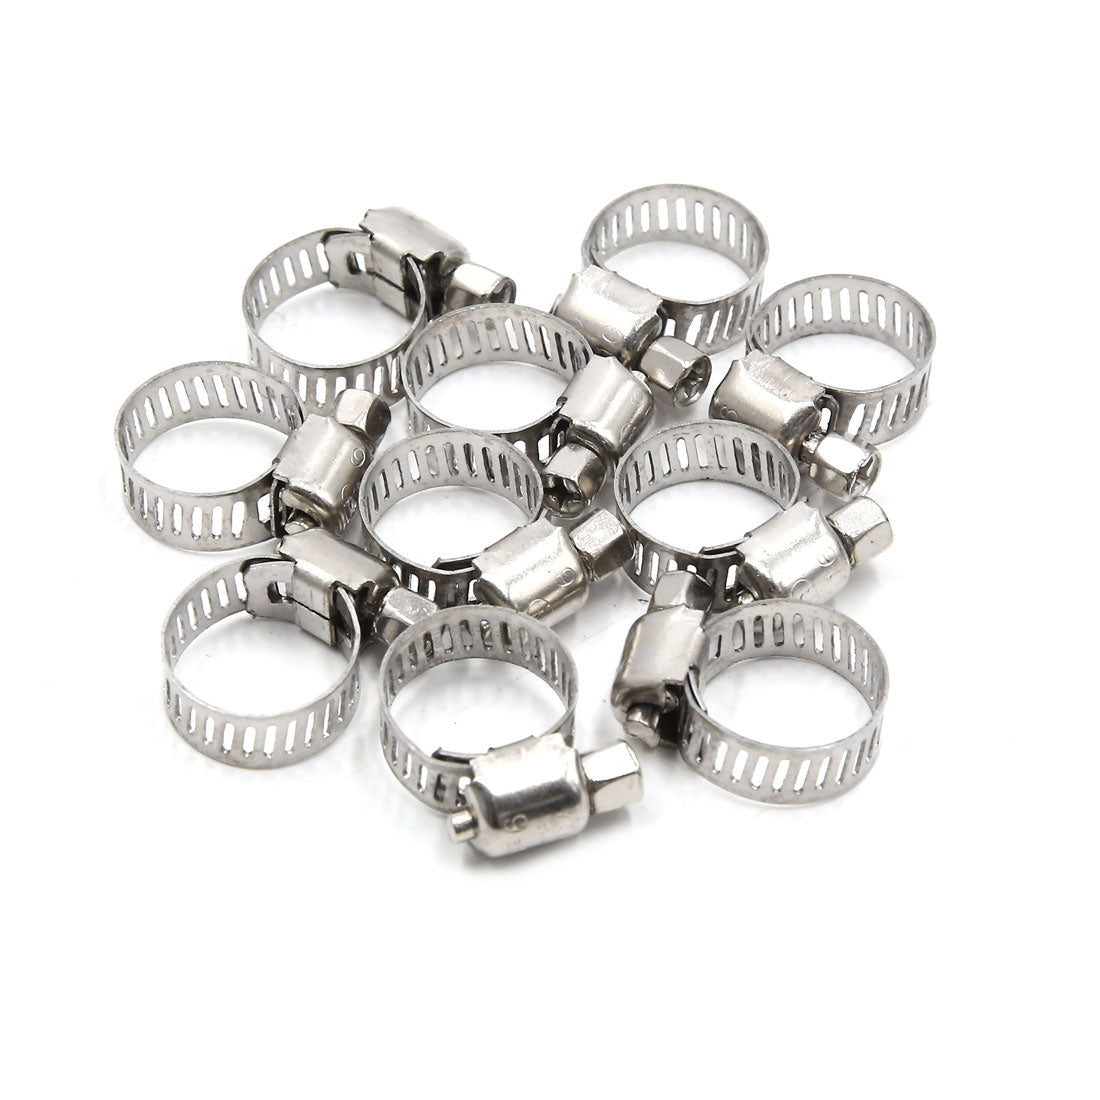 uxcell Uxcell 10pcs 9-16MM Stainless Steel Car Vehicle Drive Hose Clamp Fuel Line  Clip